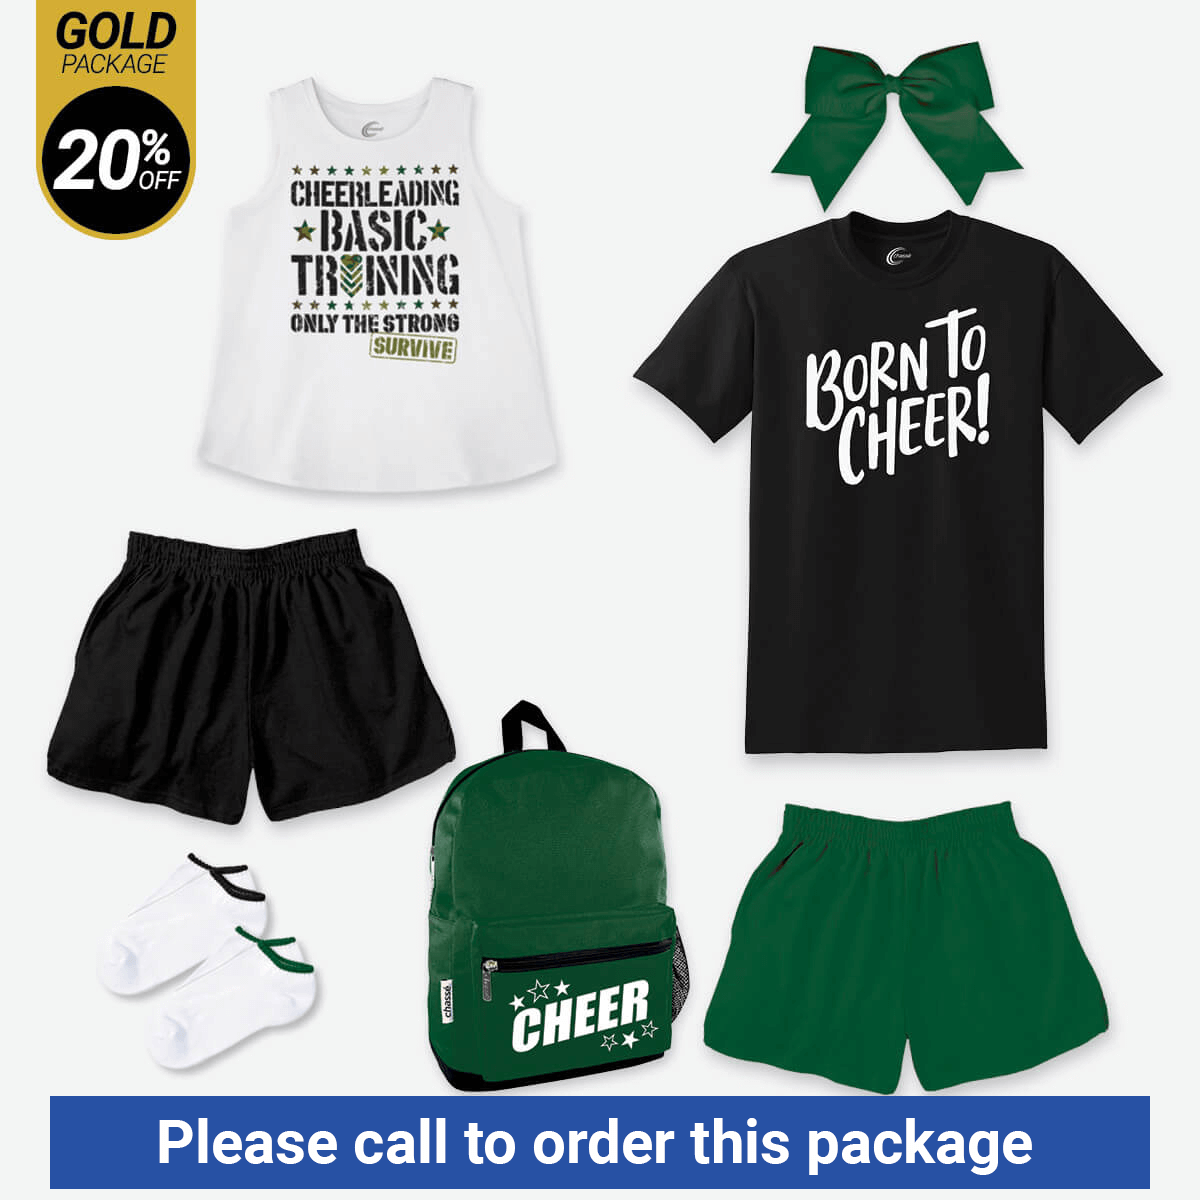 Basic Practice Wear Package - Gold